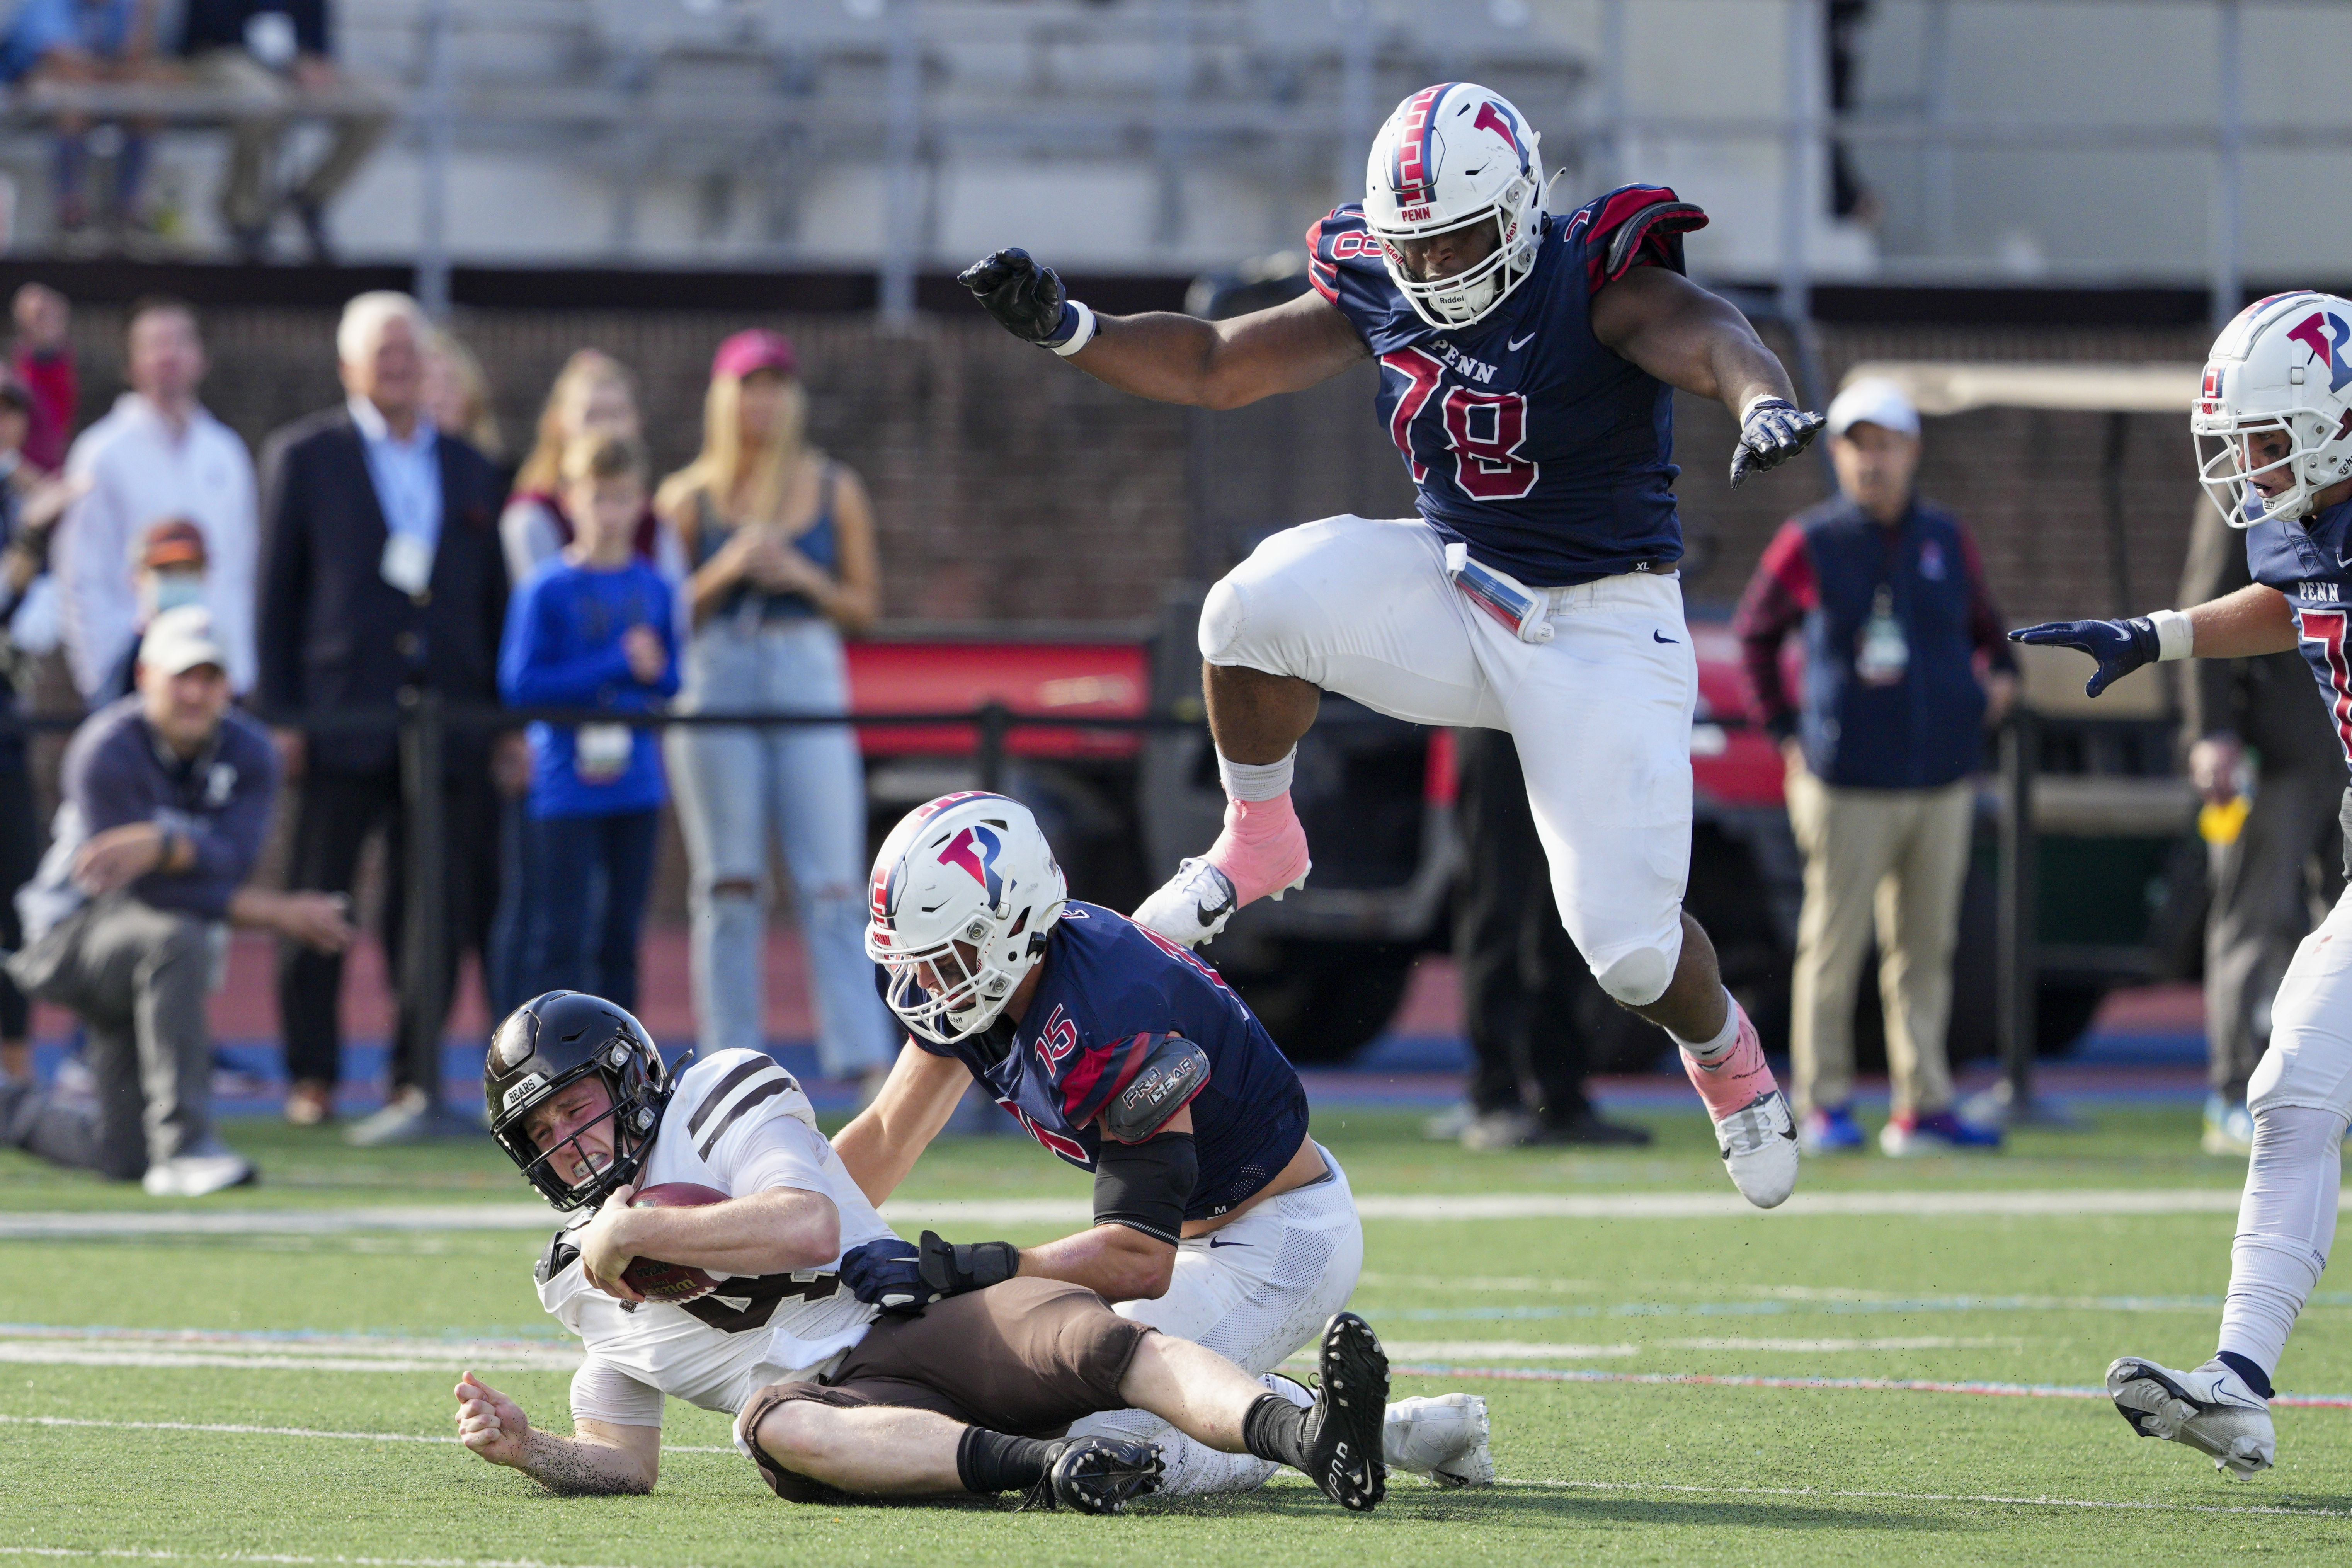 COLLEGE FOOTBALL: OCT 30 Brown at Penn